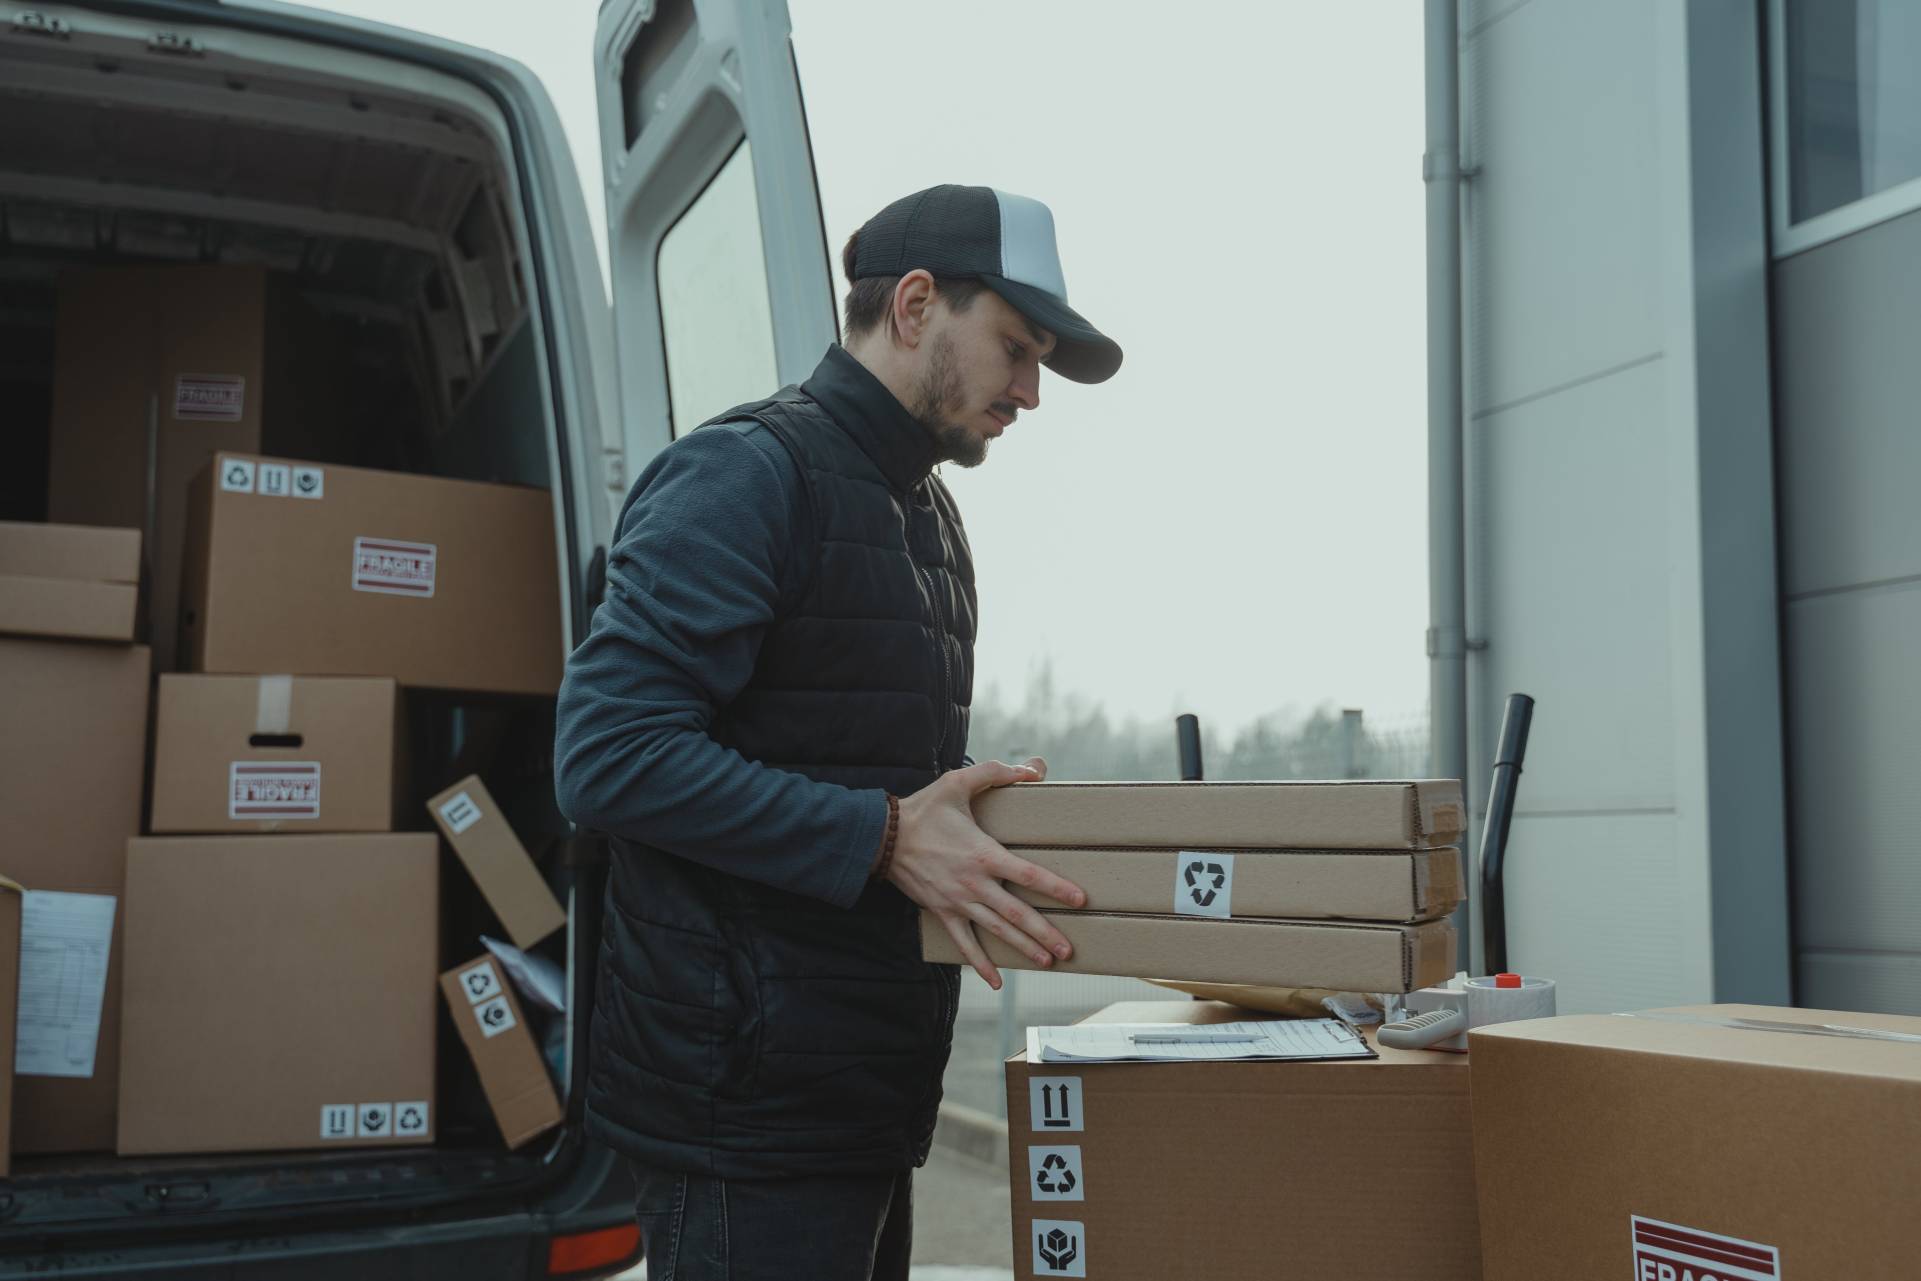 Man loading packages into the back of a truck